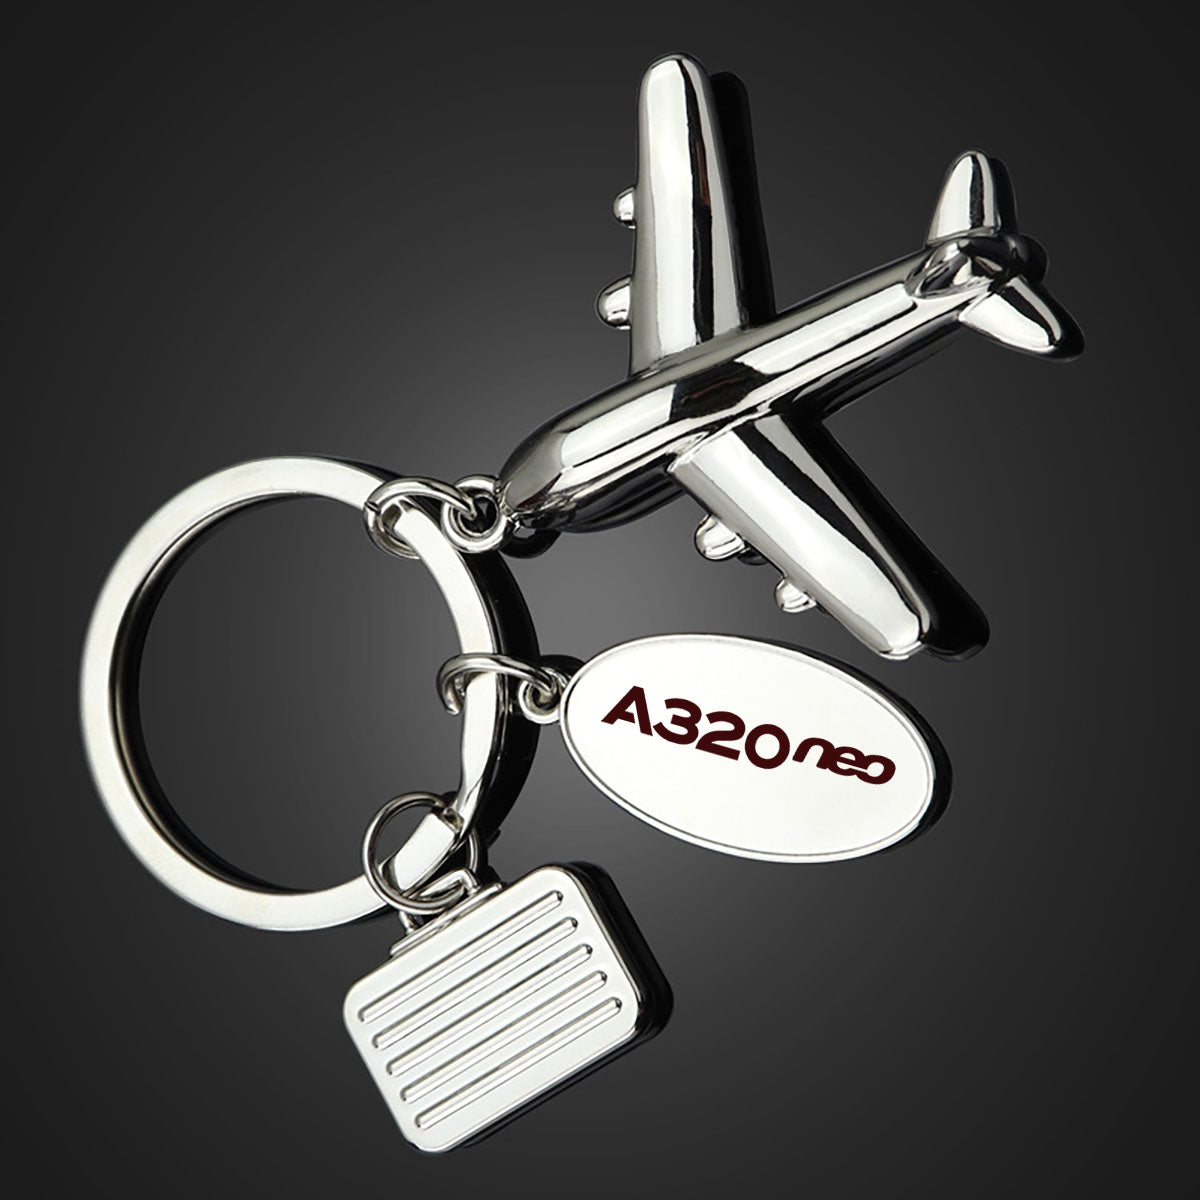 A320neo & Text Designed Suitcase Airplane Key Chains